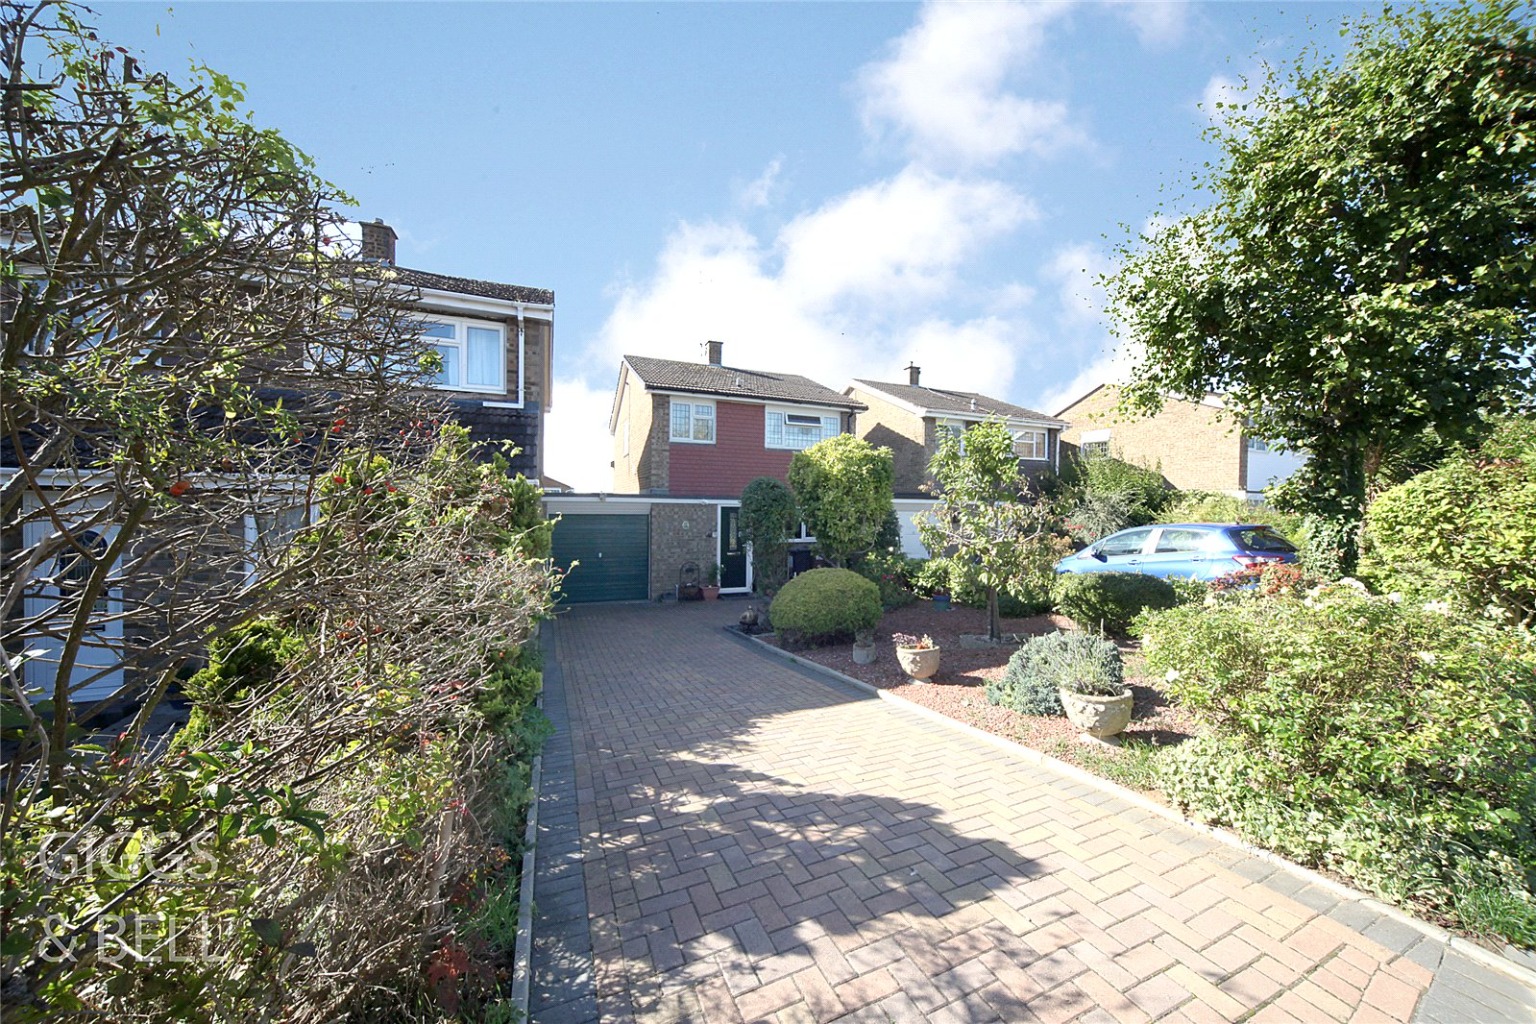 3 bed link detached house for sale in Brompton Close, Luton - Property Image 1